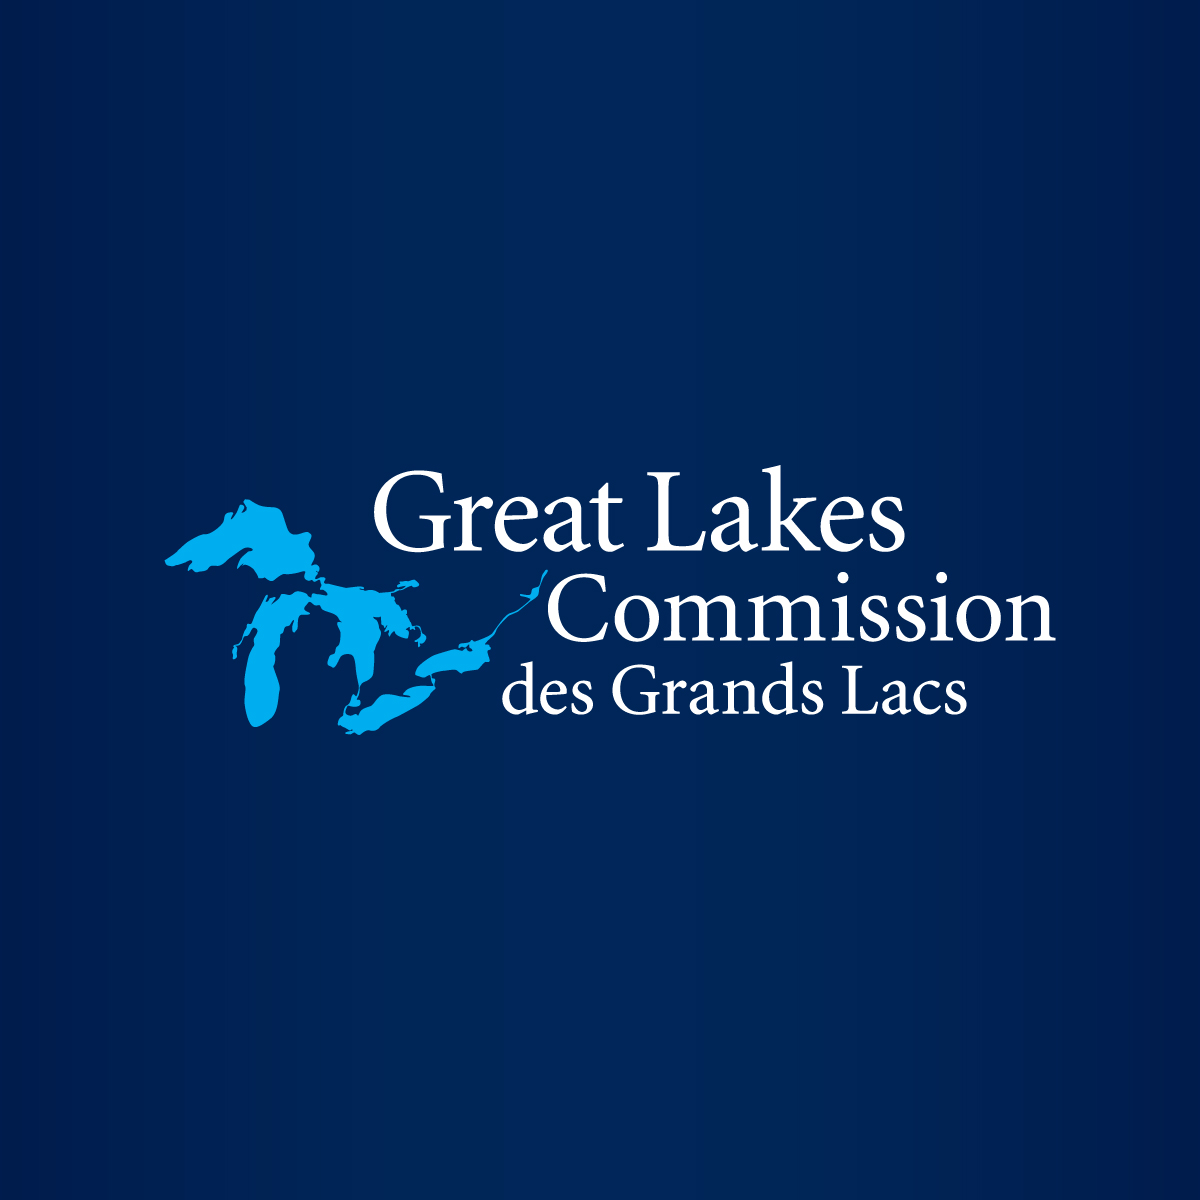 answering shippings biggest questions as great lakes open for business